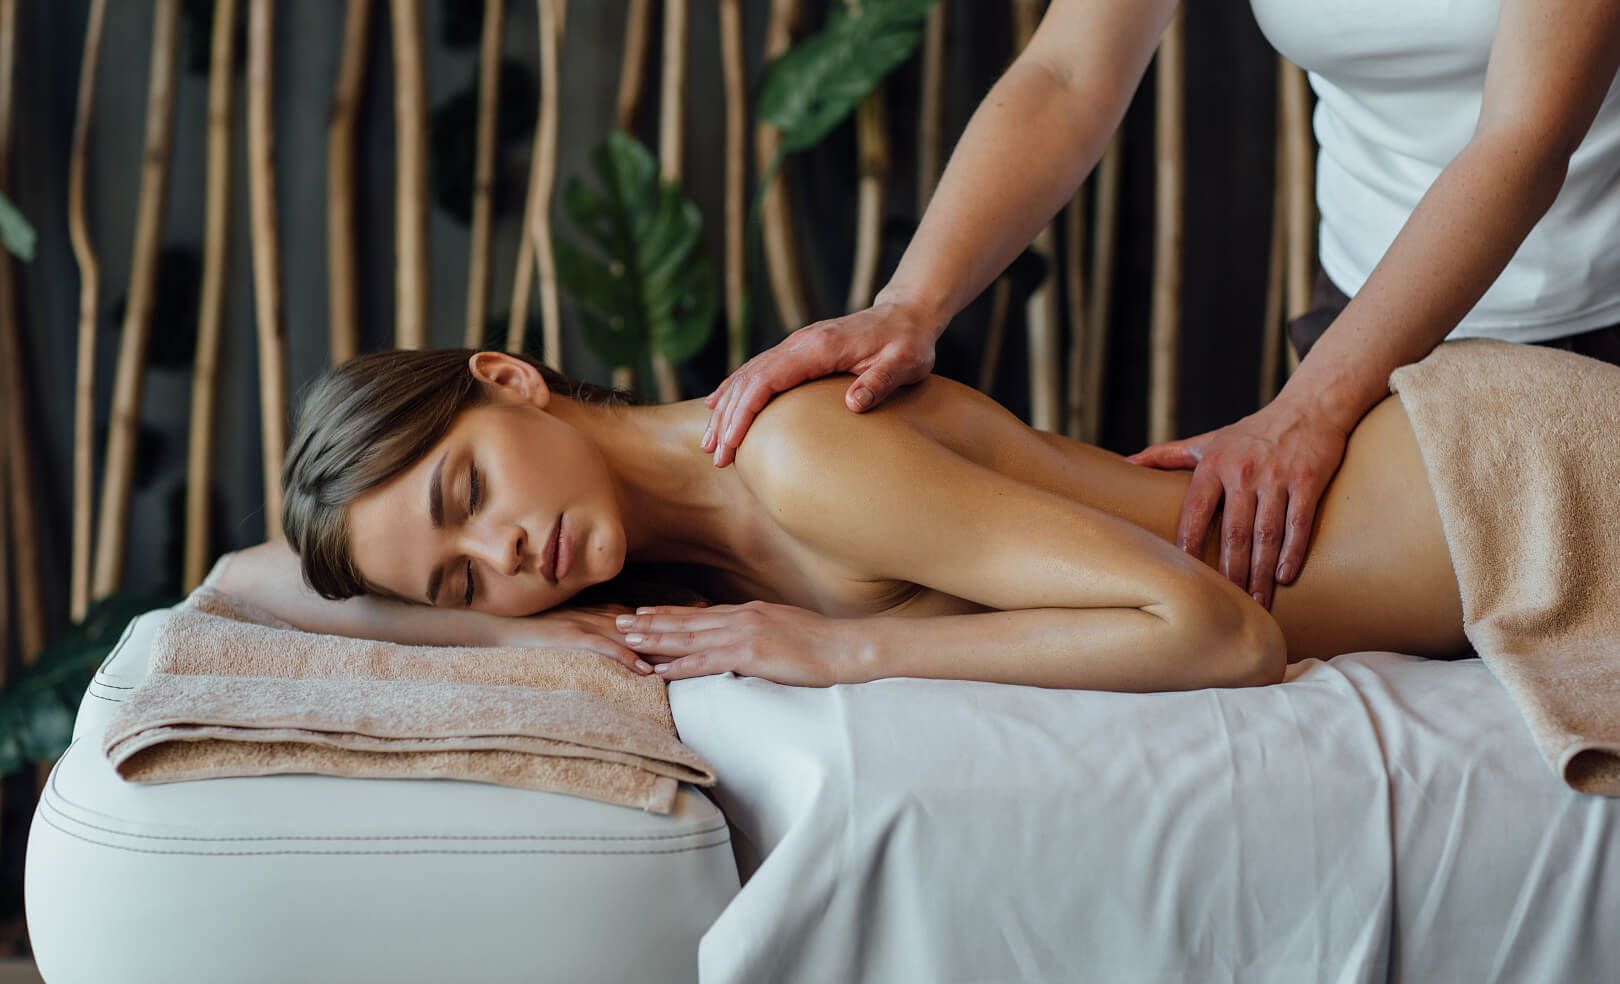 Give your body a complete immersion in the atmosphere of relaxation!